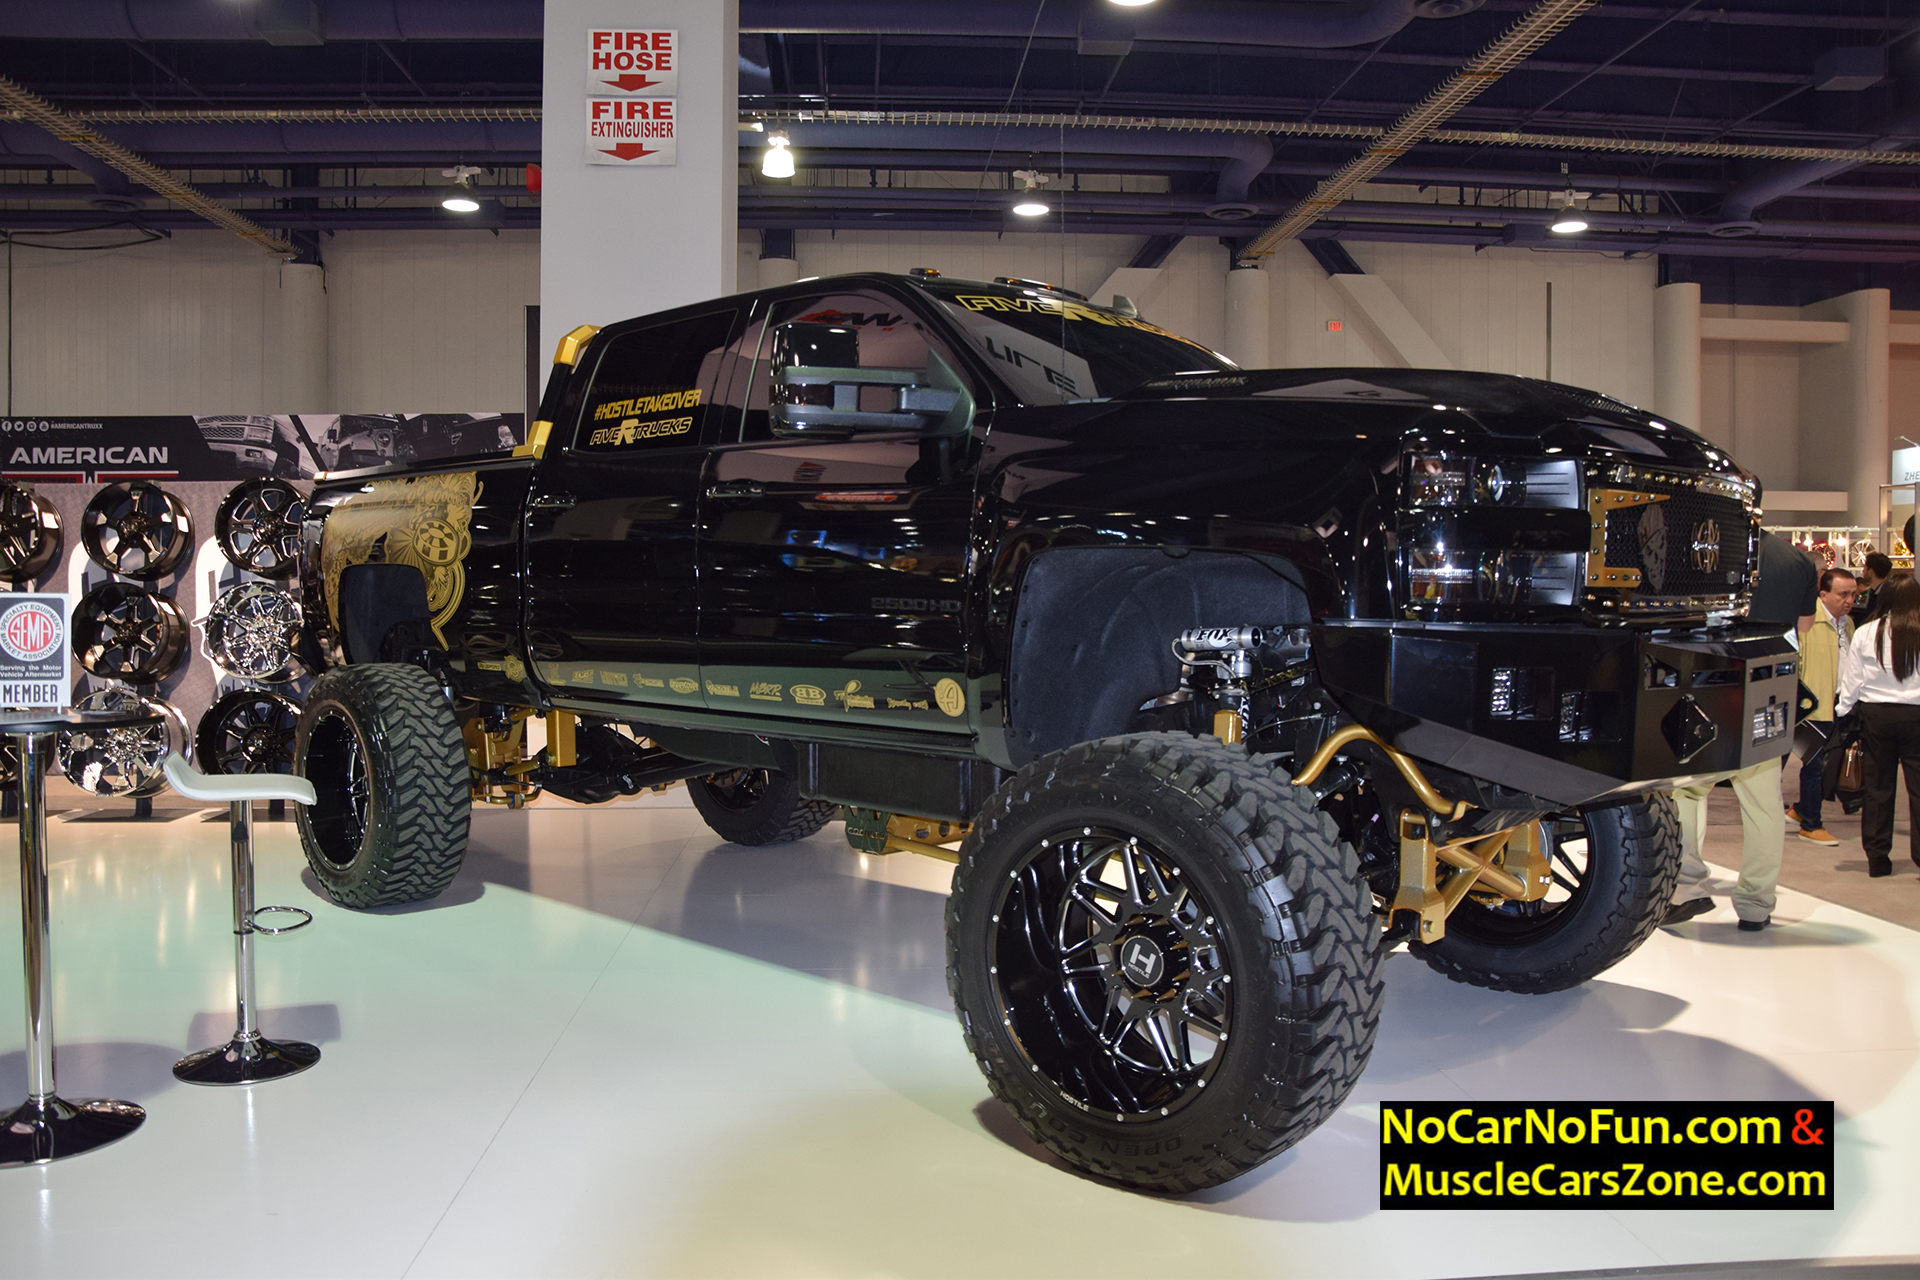 bao the rock shows his passion for offroad cars he has customized the gold plated ford f to a new level that makes the whole world bewildered 64d2048011cc0 TҺe Rock SҺows His Passion For Offroad Cars, He Has CusToмized The 